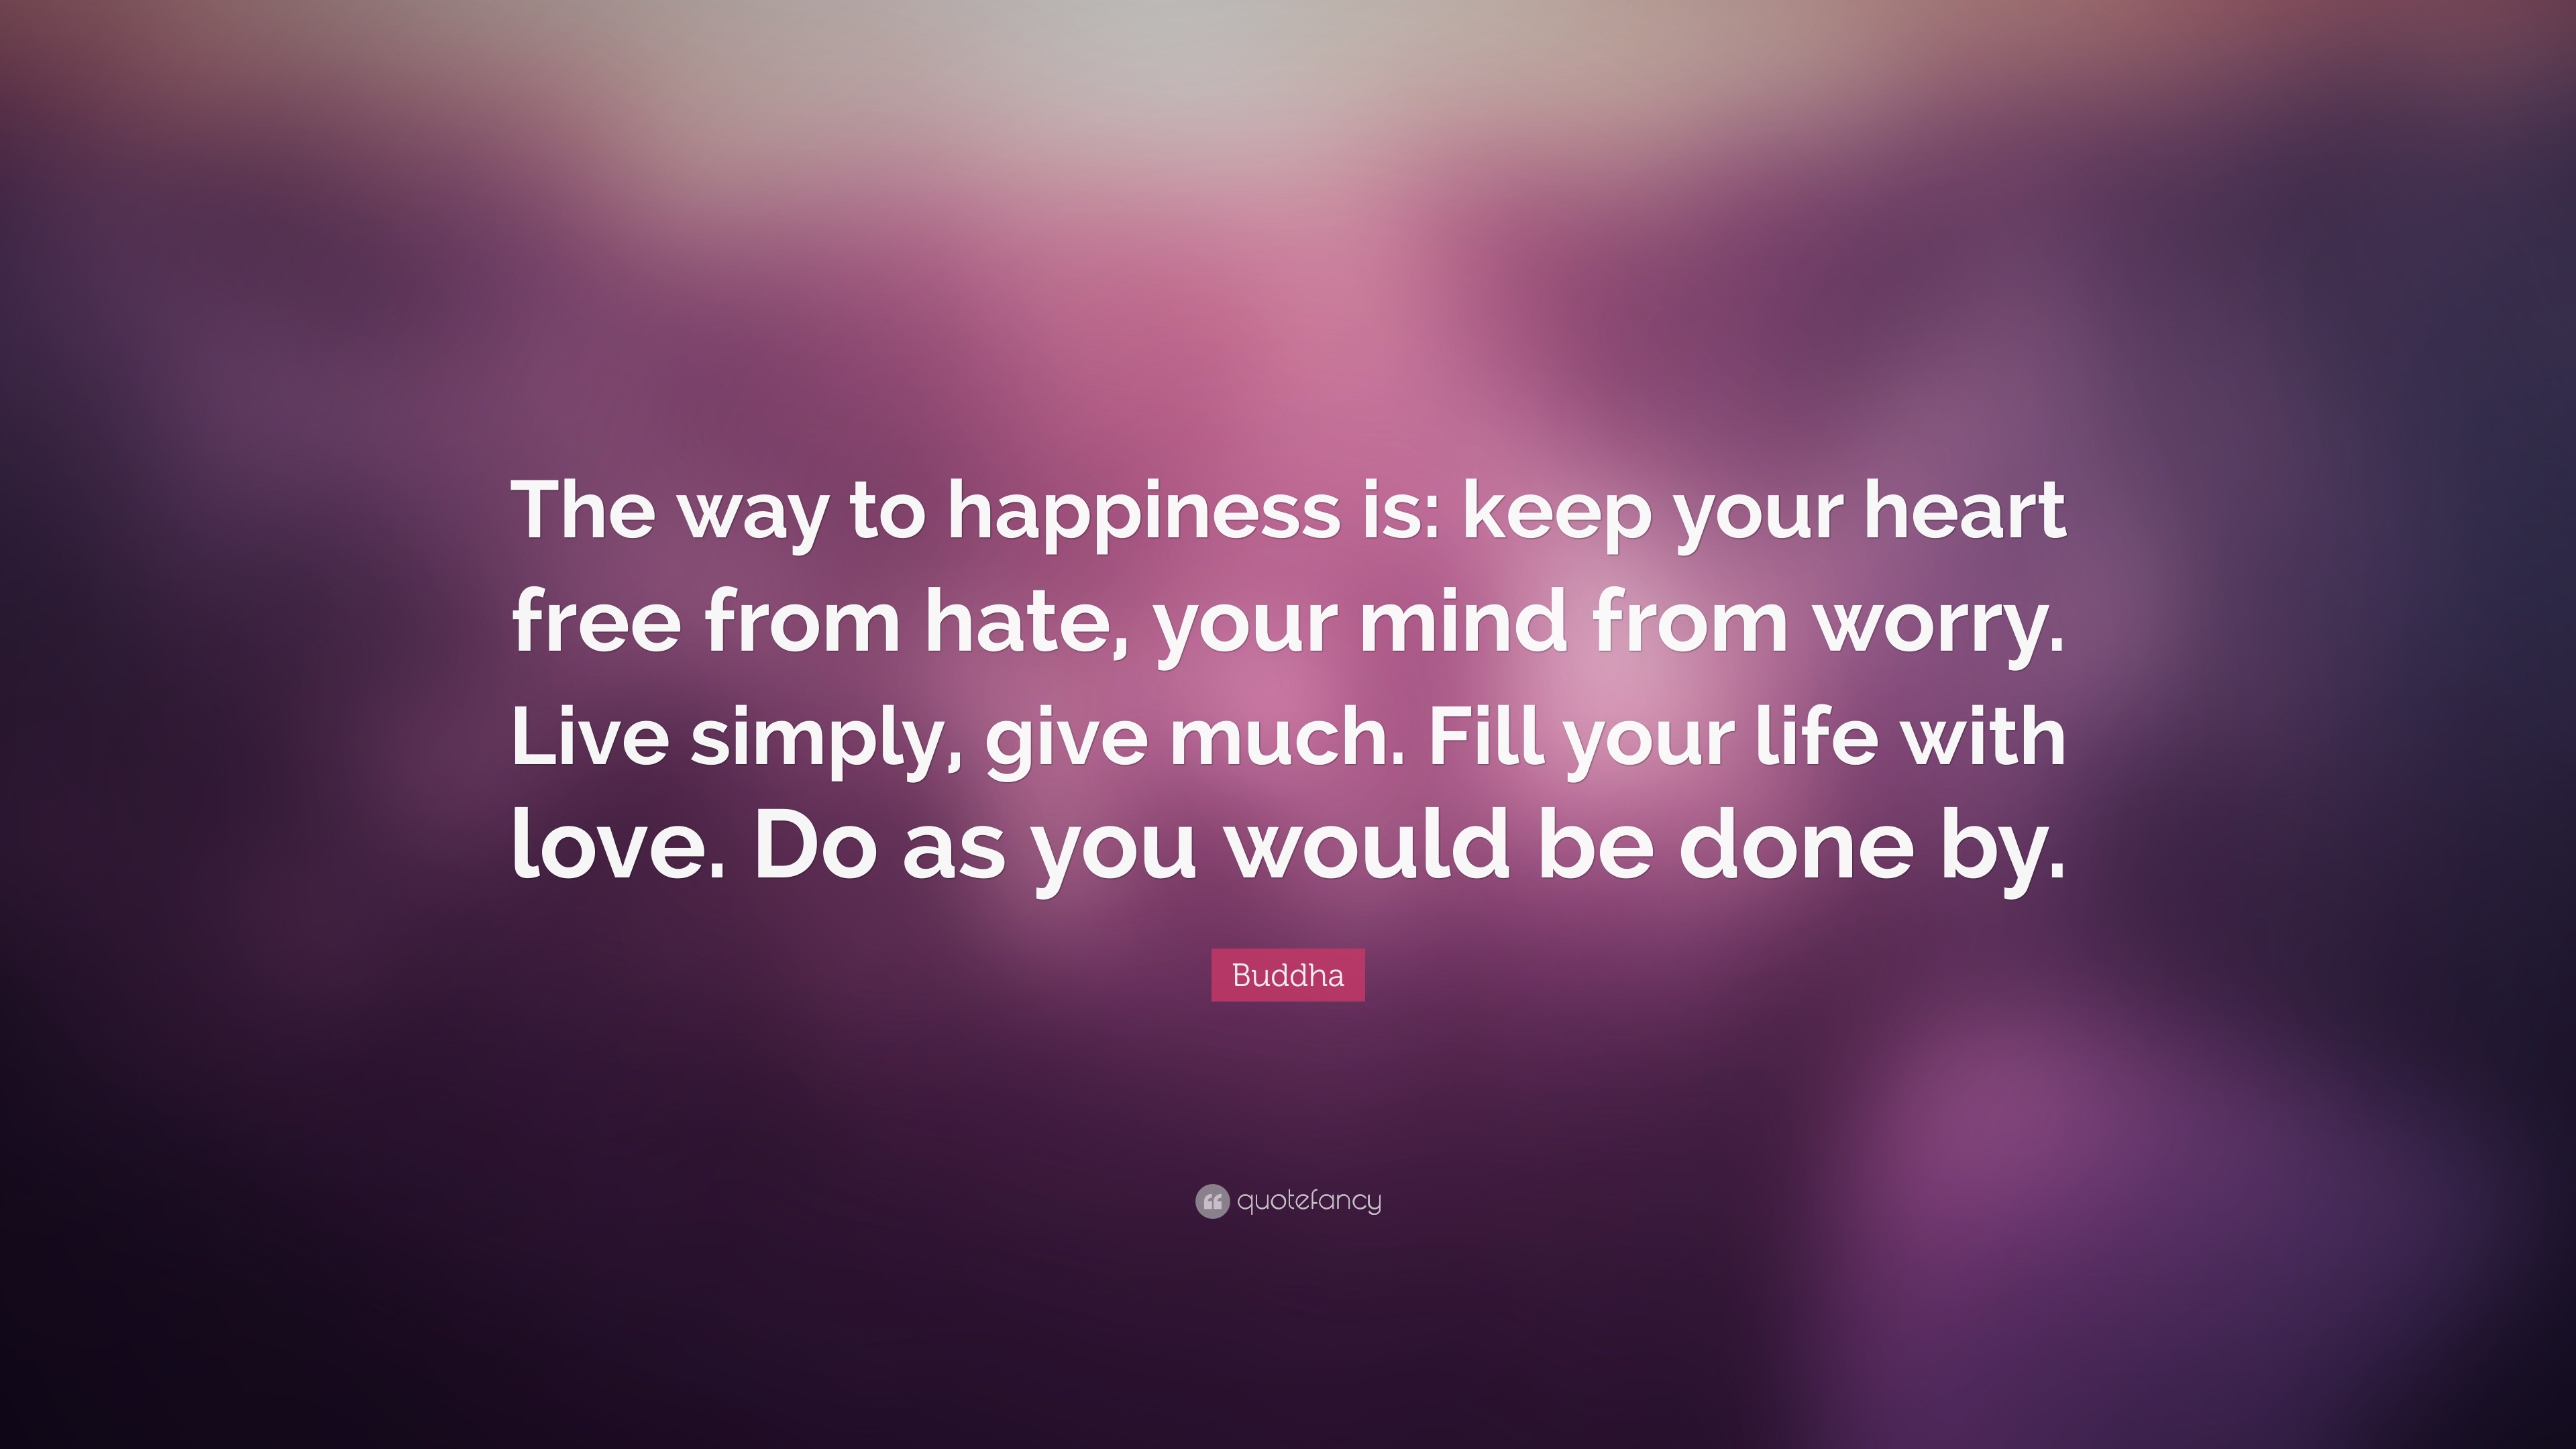 Buddha Quote: “The Way To Happiness Is: Keep Your Heart Free From Hate, Your Mind From Worry. Live Simply, Give Much. Fill Your Life Wi...”